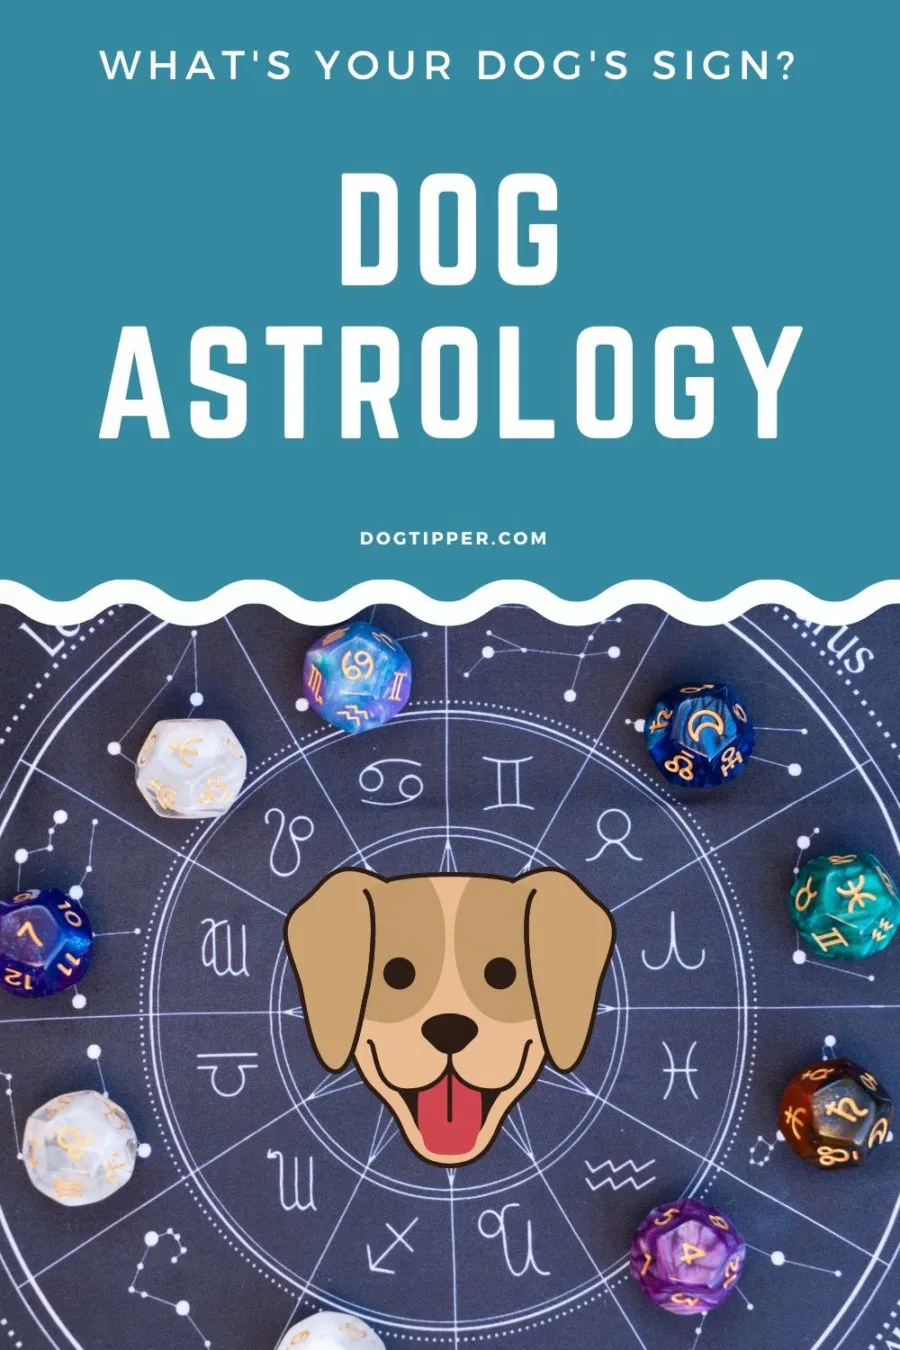 Decode your dog's unique personality traits based on their astrological sign